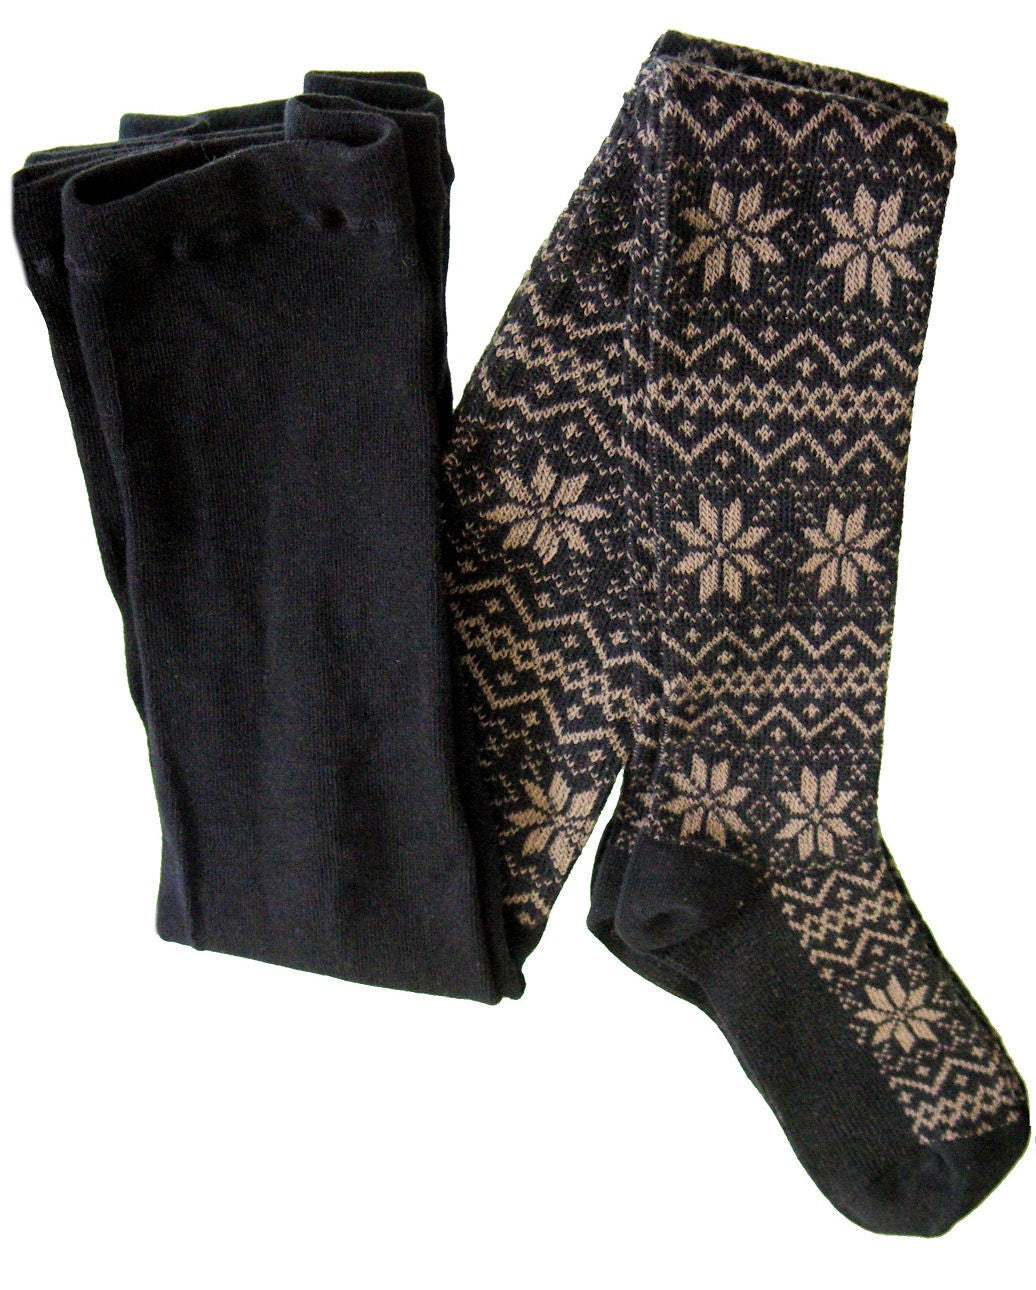 Nordic Print Cotton A26 Tights by Marilyn